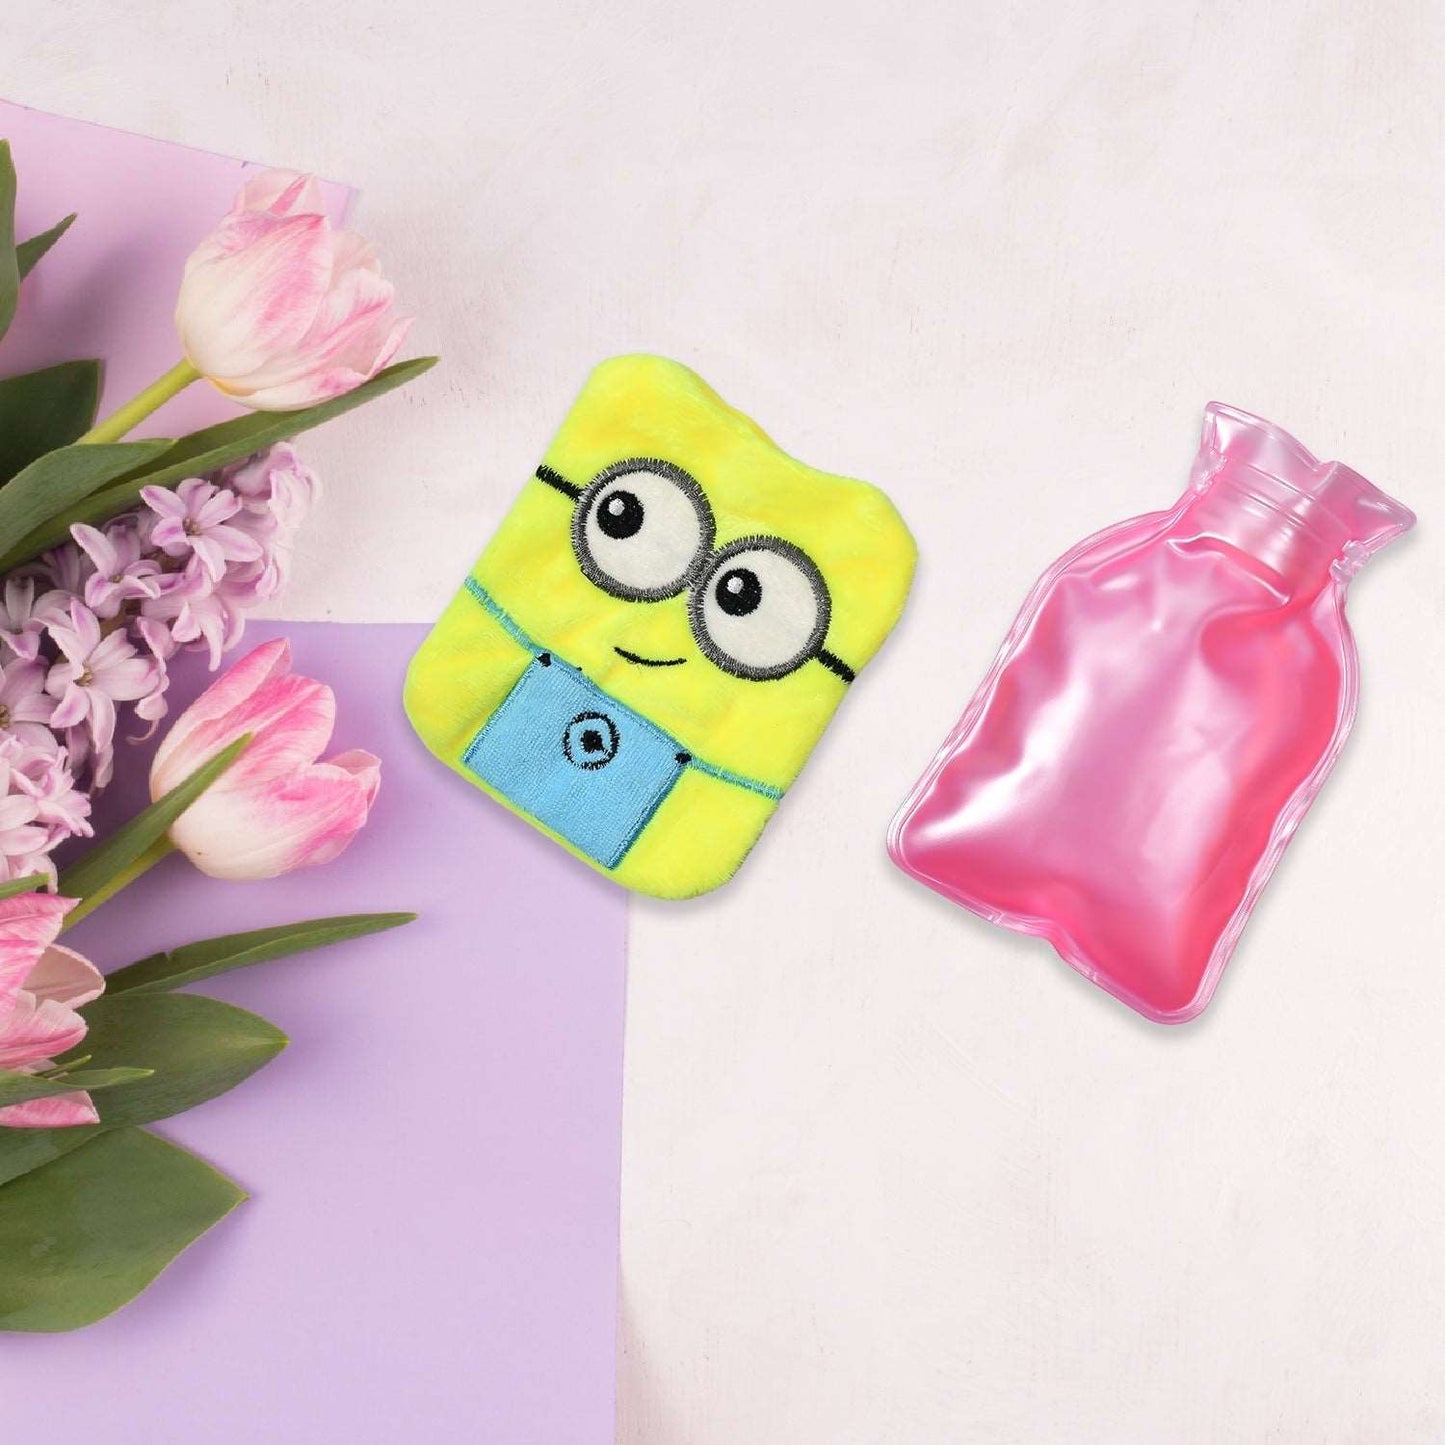 2Eye Minions small Hot Water Bag with Cover for Pain Relief, Neck, Shoulder Pain and Hand, Feet Warmer, Menstrual Cramps